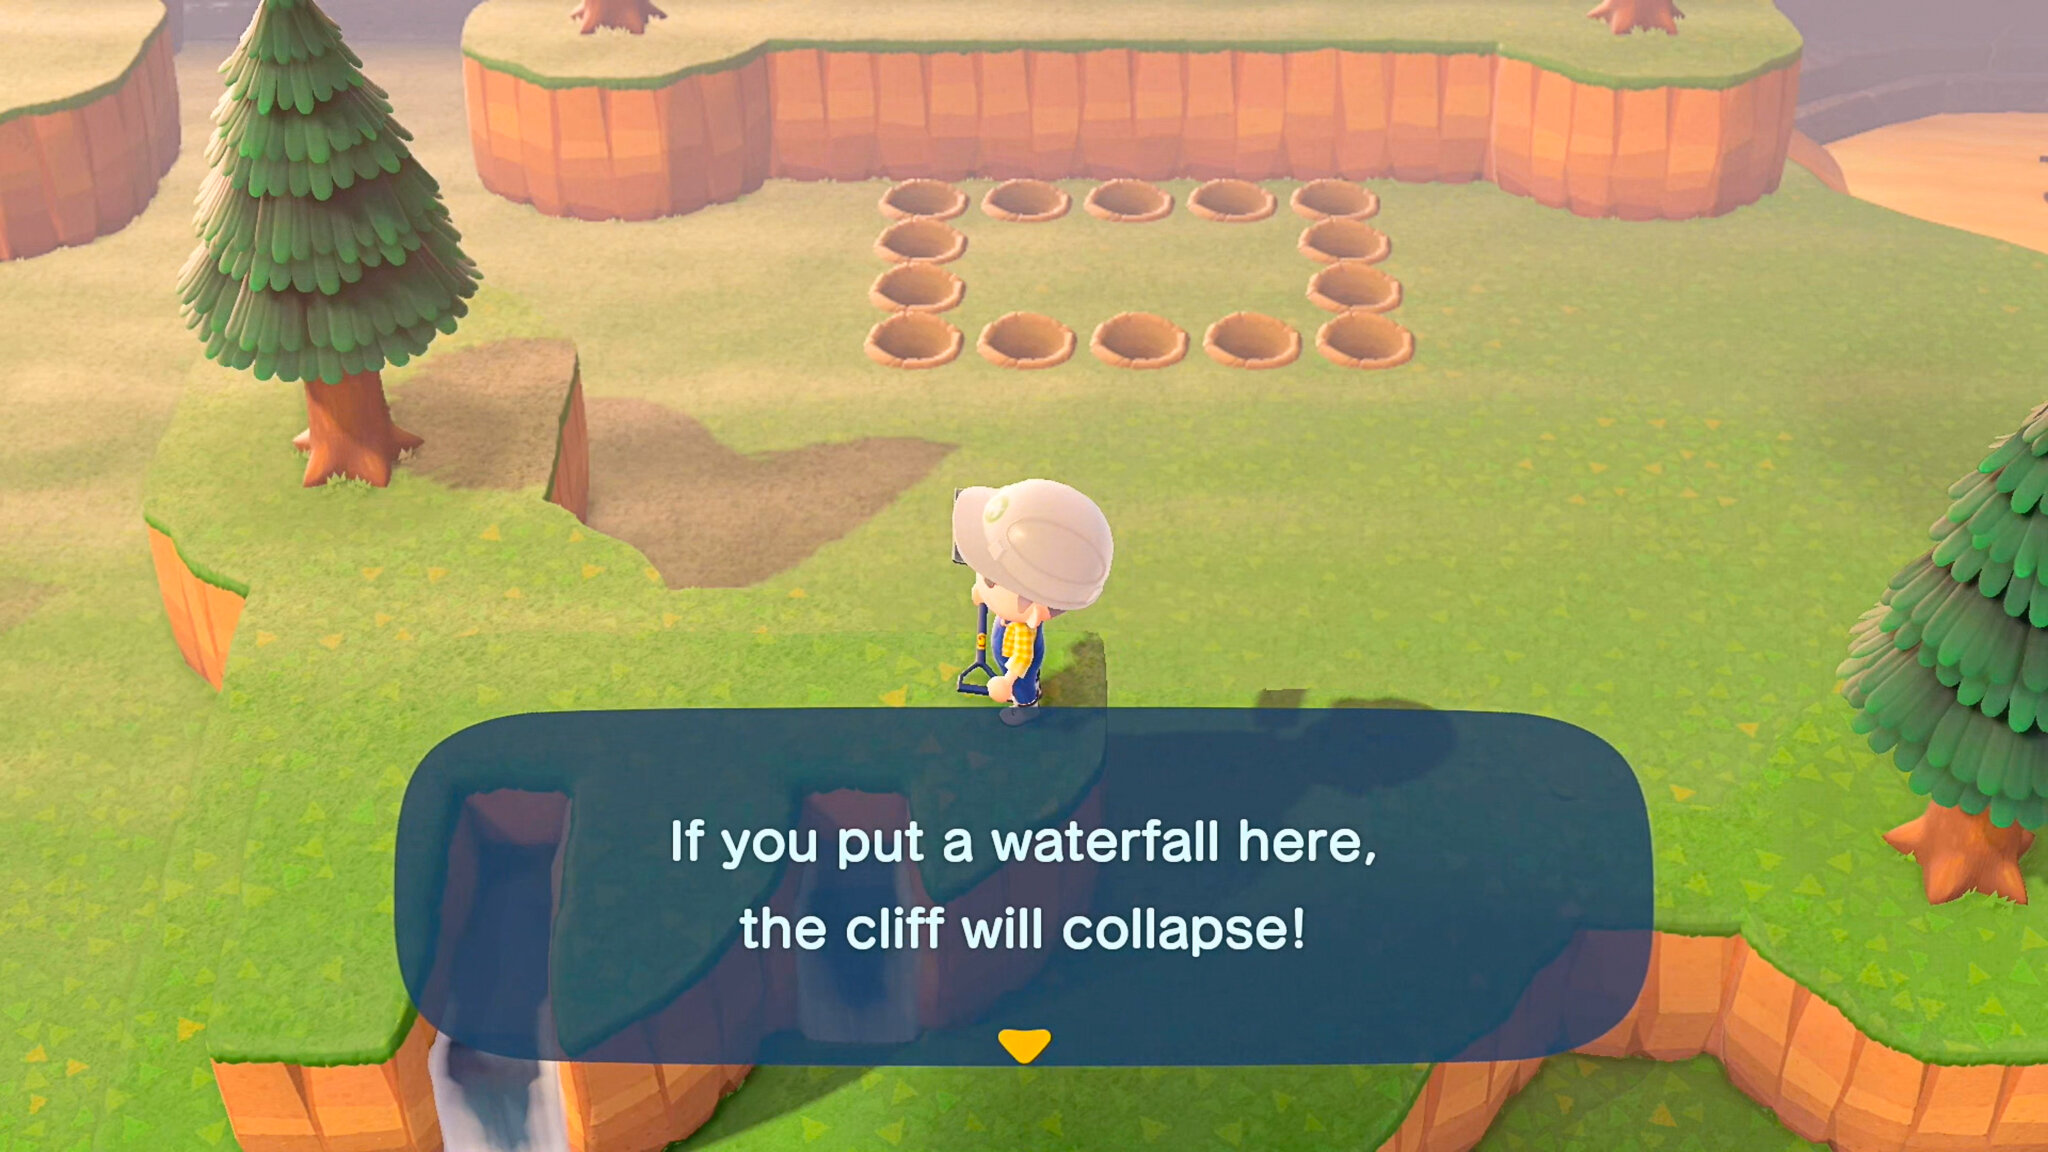 Animal Crossing tips: Our guide to getting started in New Horizons